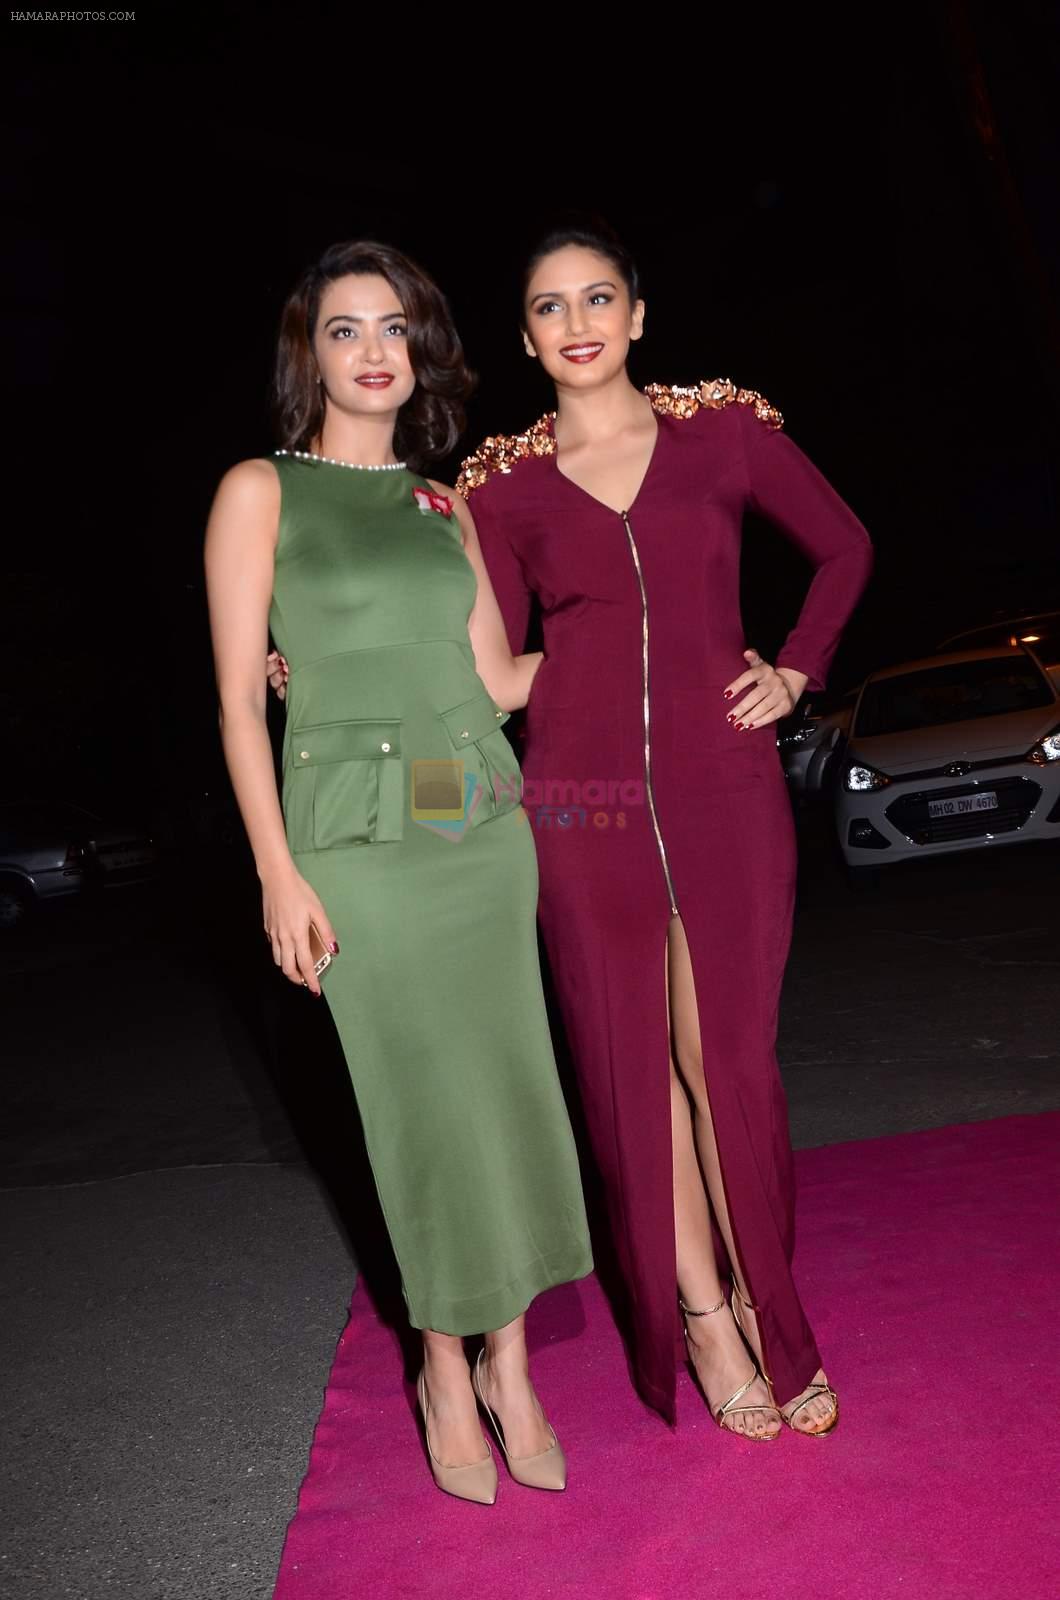 Surveen Chawla, Huma Qureshi at Grazia young fashion awards red carpet in Leela Hotel on 15th April 2015